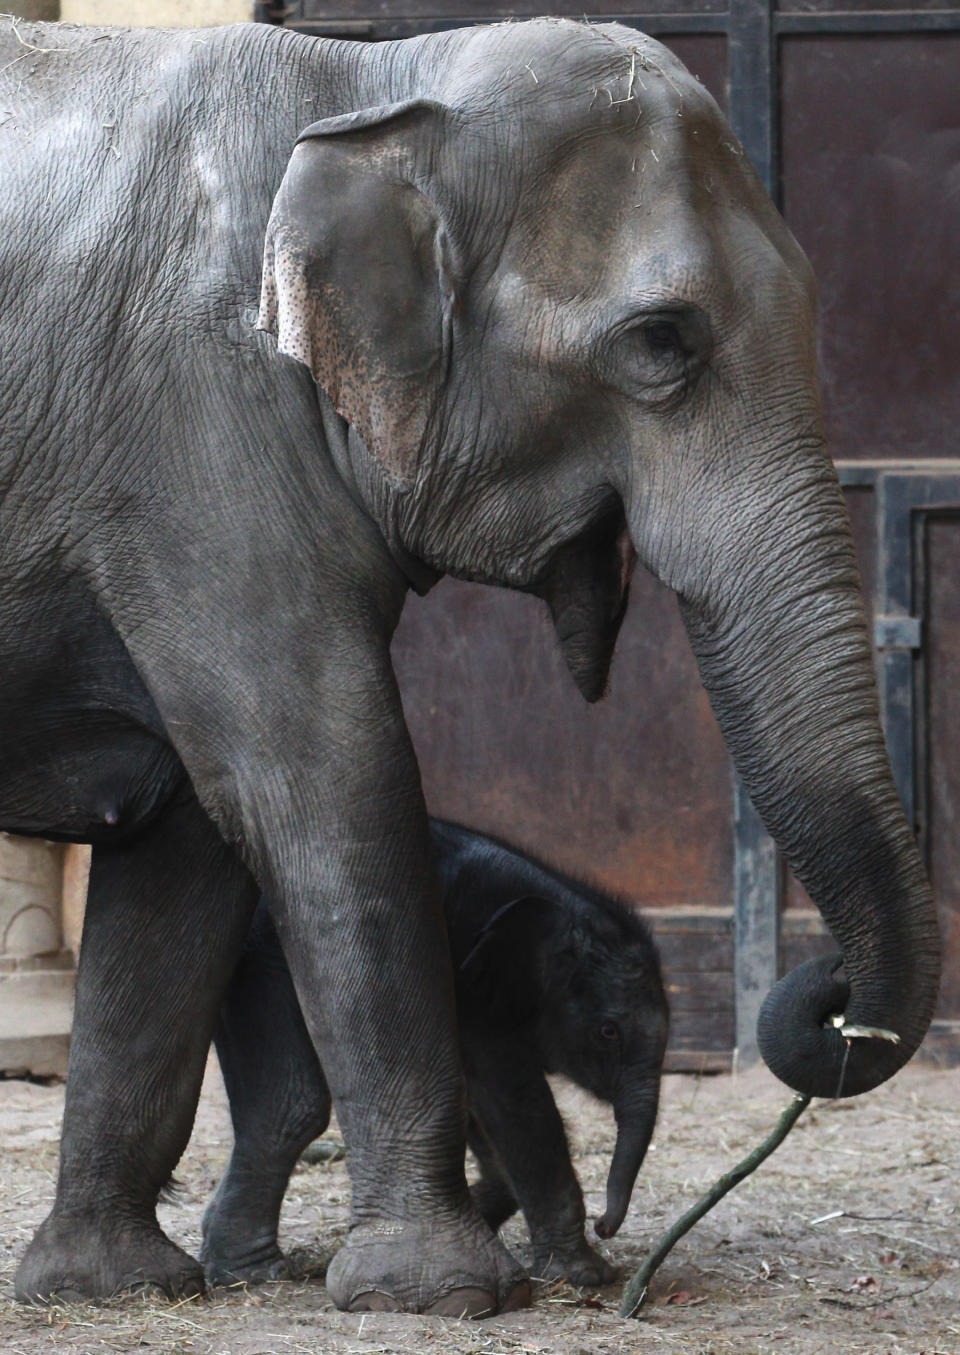 An unnamed baby elephant calf explores alongside his mother Lai Sinh the elephant barn at the Hagenbeck Zoo on April 18, 2012 in Hamburg, Germany. The male calf was born on April 13 with a weight of 100 kilos as the third calf of mother elephant Lai Sinh. (Photo by Joern Pollex/Getty Images)